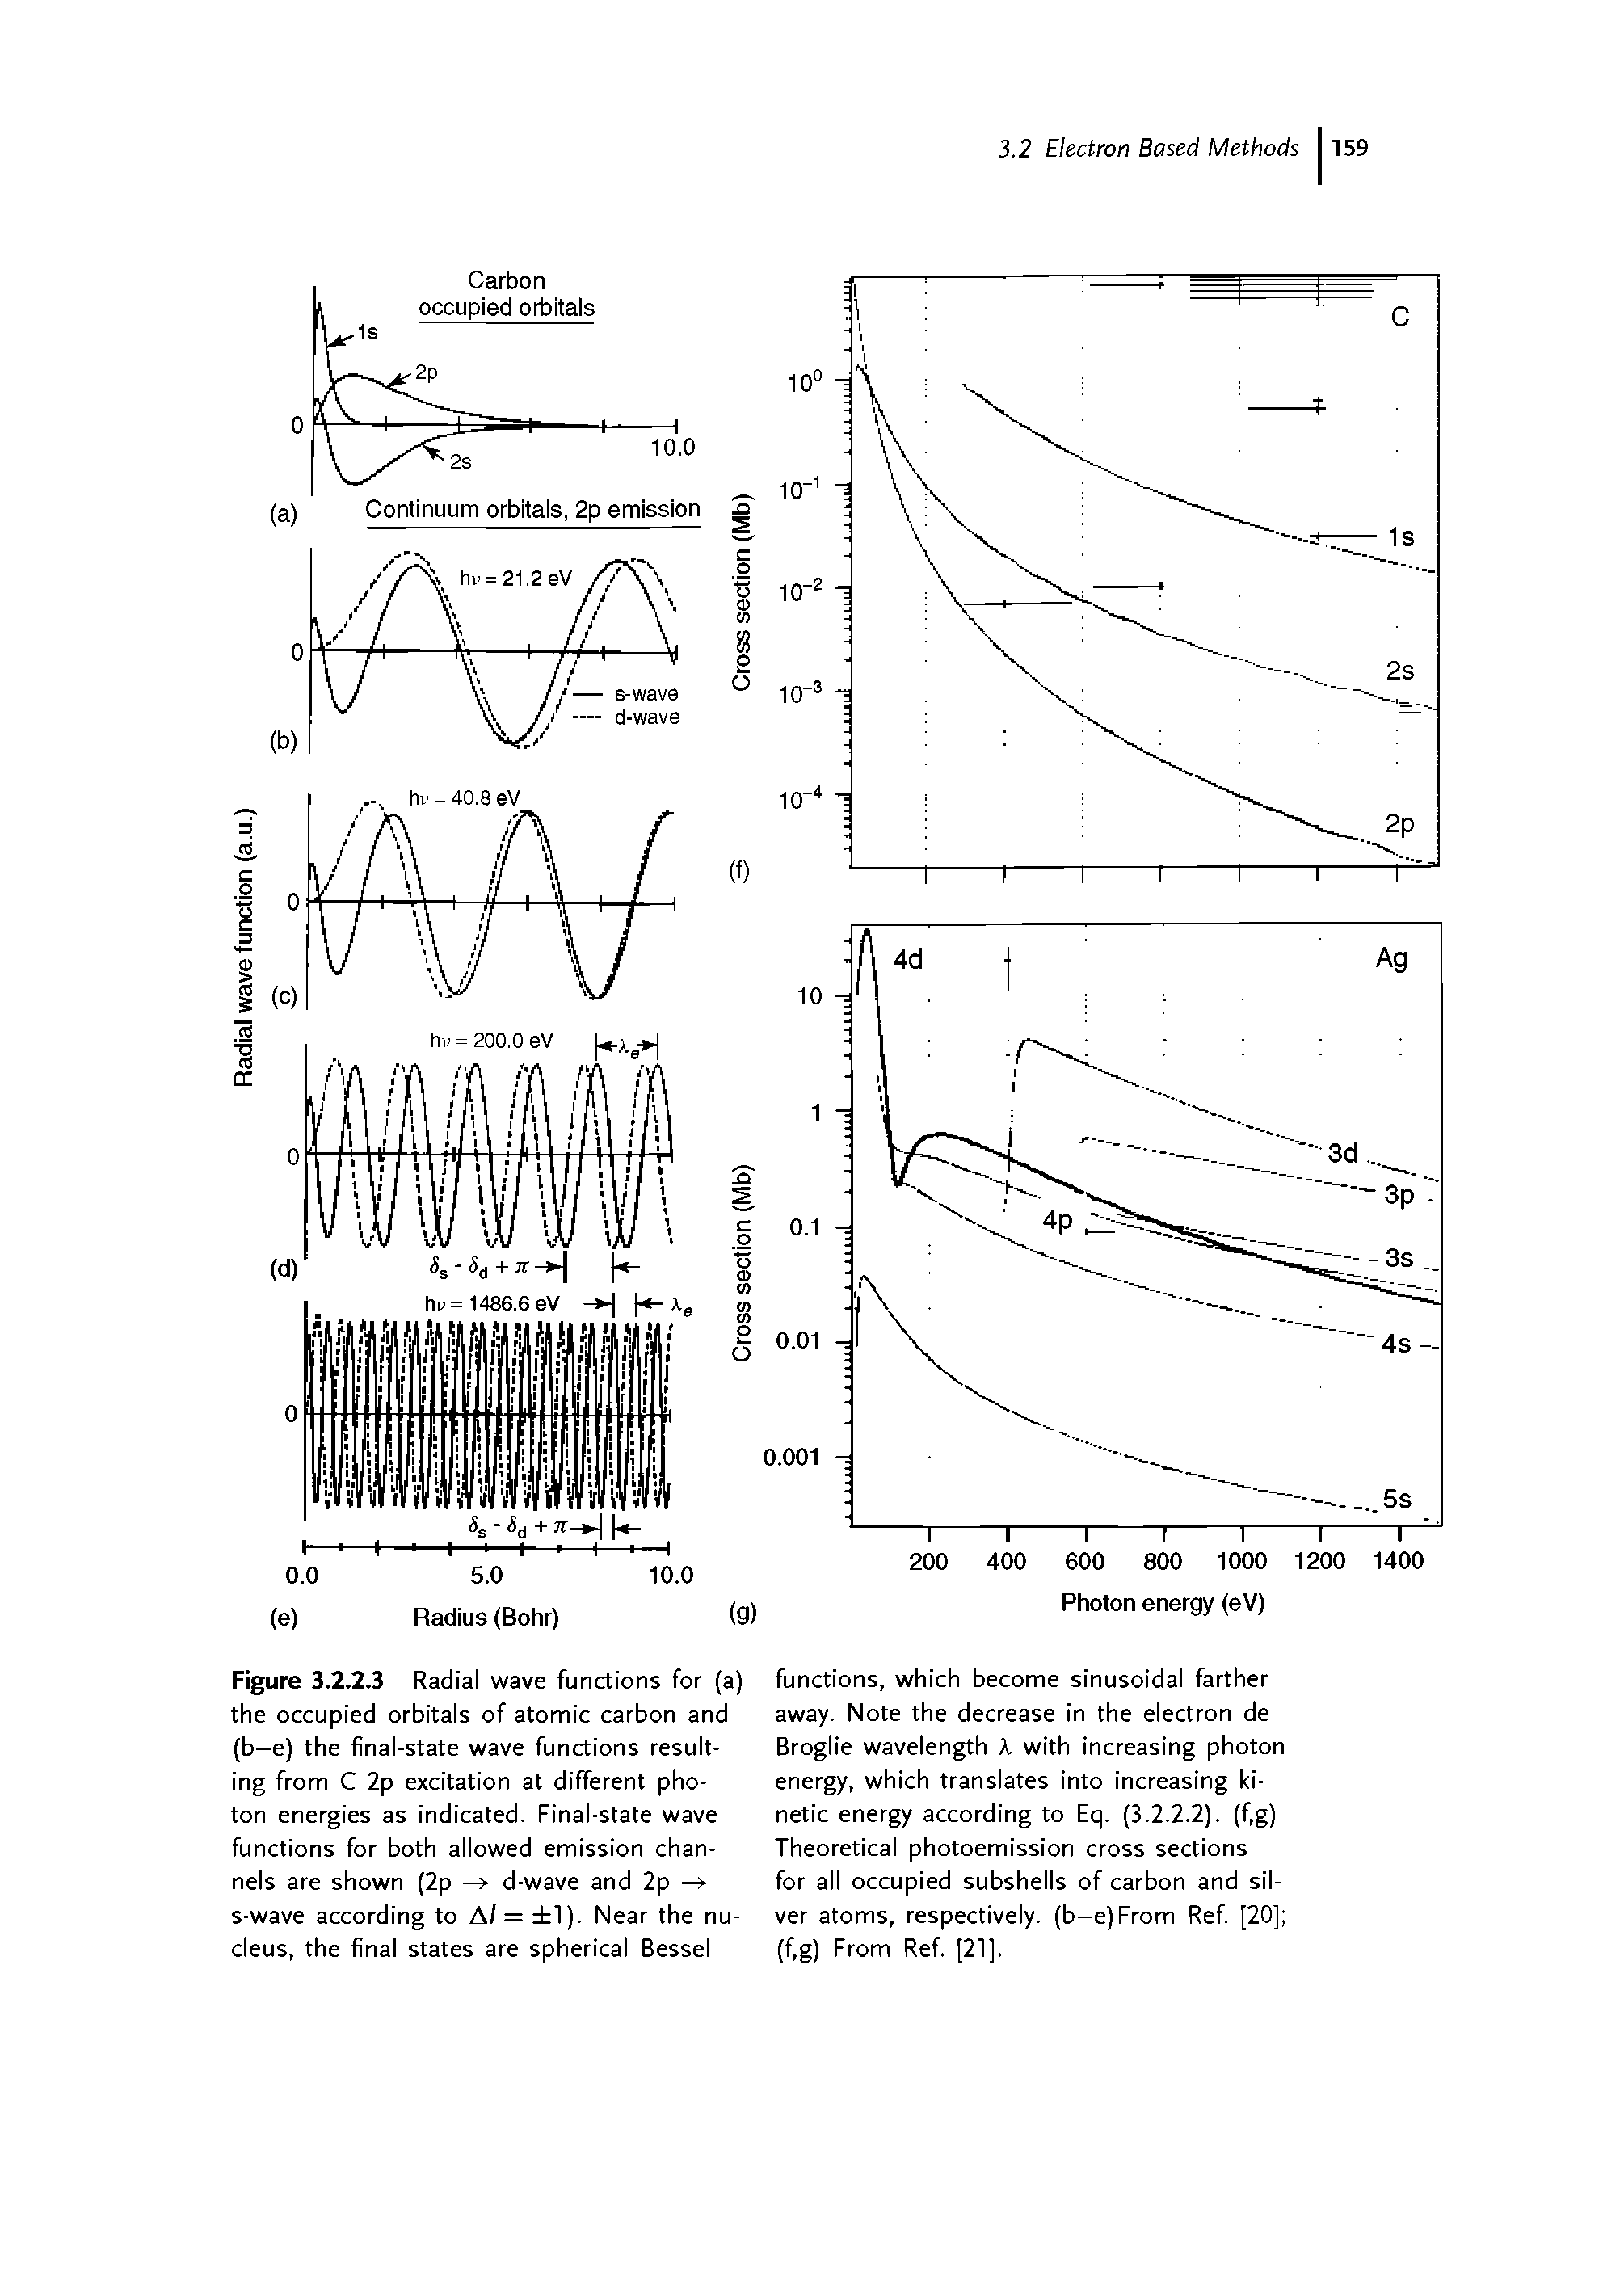 Figure S.2.2.3 Radial wave functions for (a) the occupied orbitals of atomic carbon and (b-e) the final-state wave functions resulting from C 2p excitation at different photon energies as indicated. Final-state wave functions for both allowed emission channels are shown (2p -r d-wave and 2p —r s-wave according to A/ = 1). Near the nucleus, the final states are spherical Bessel...